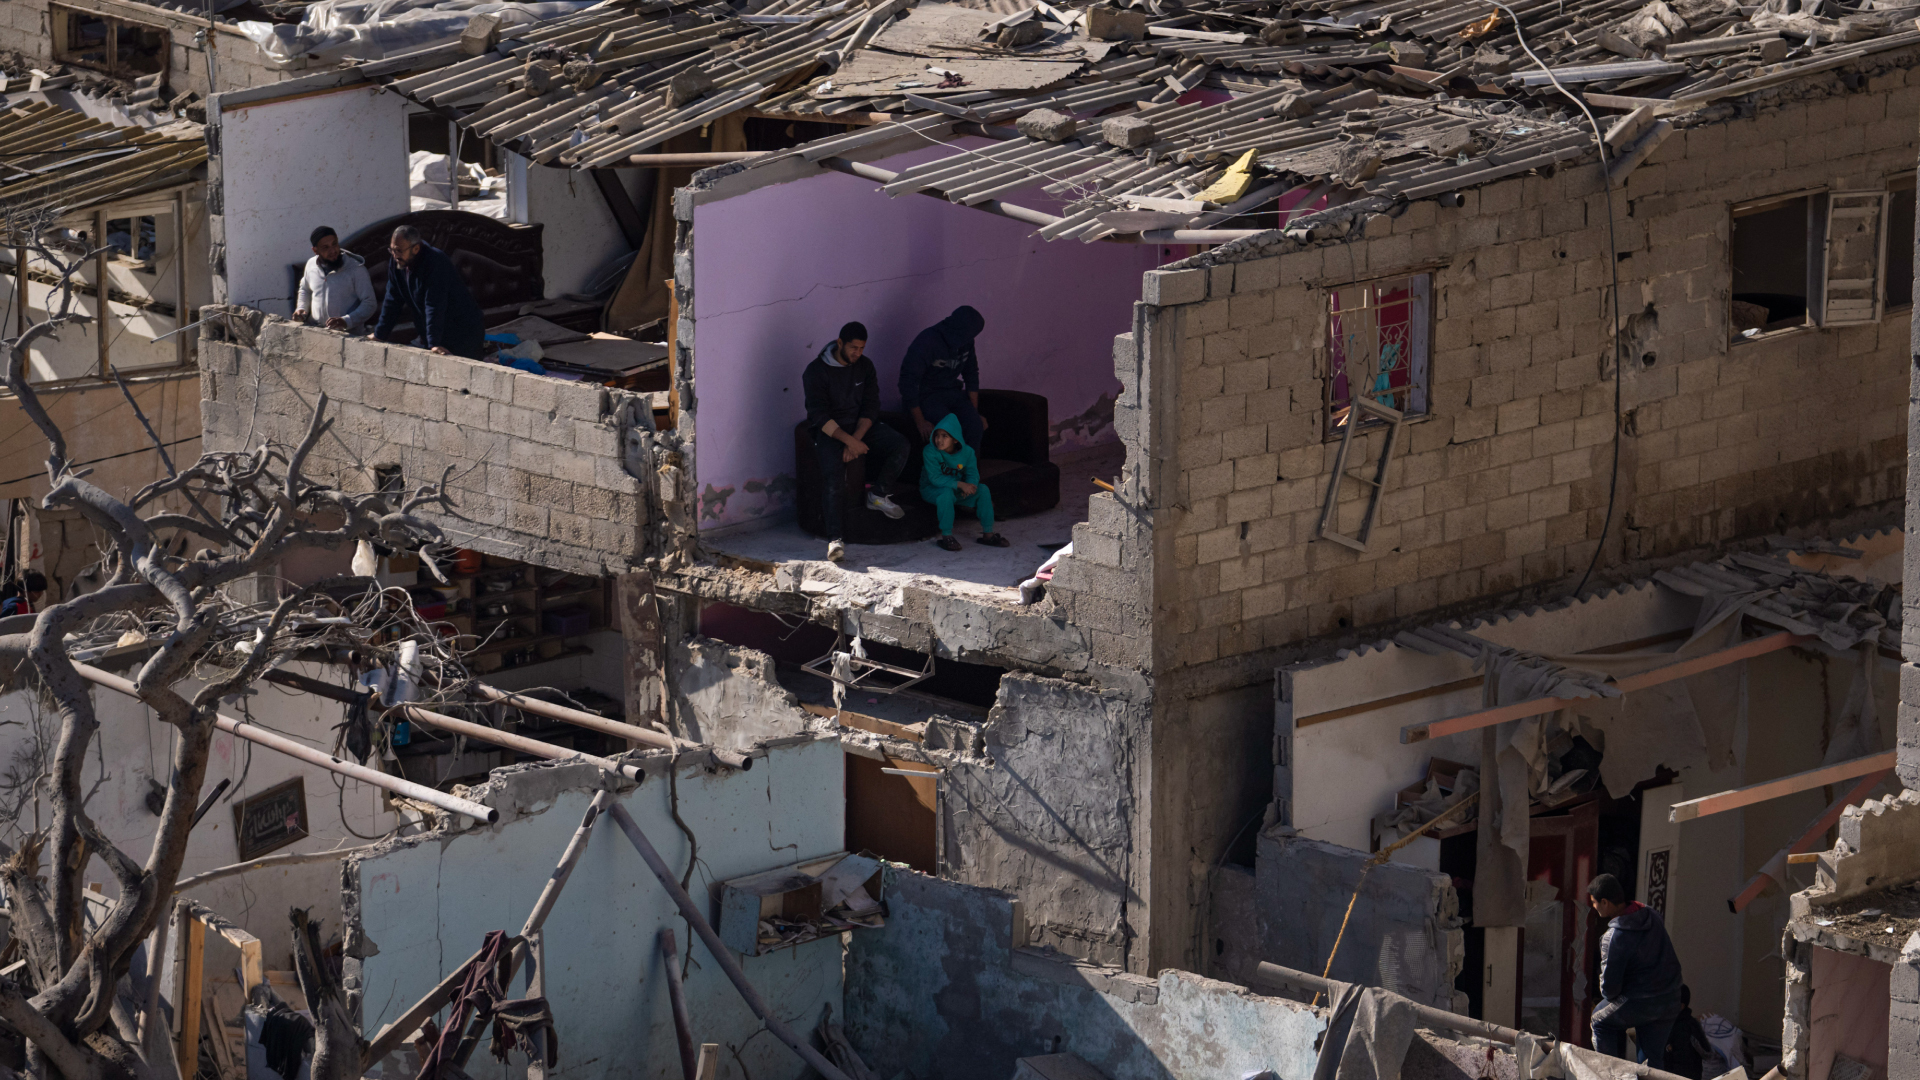 Has Israel committed domicide in Gaza? | Israel-Palestine conflict